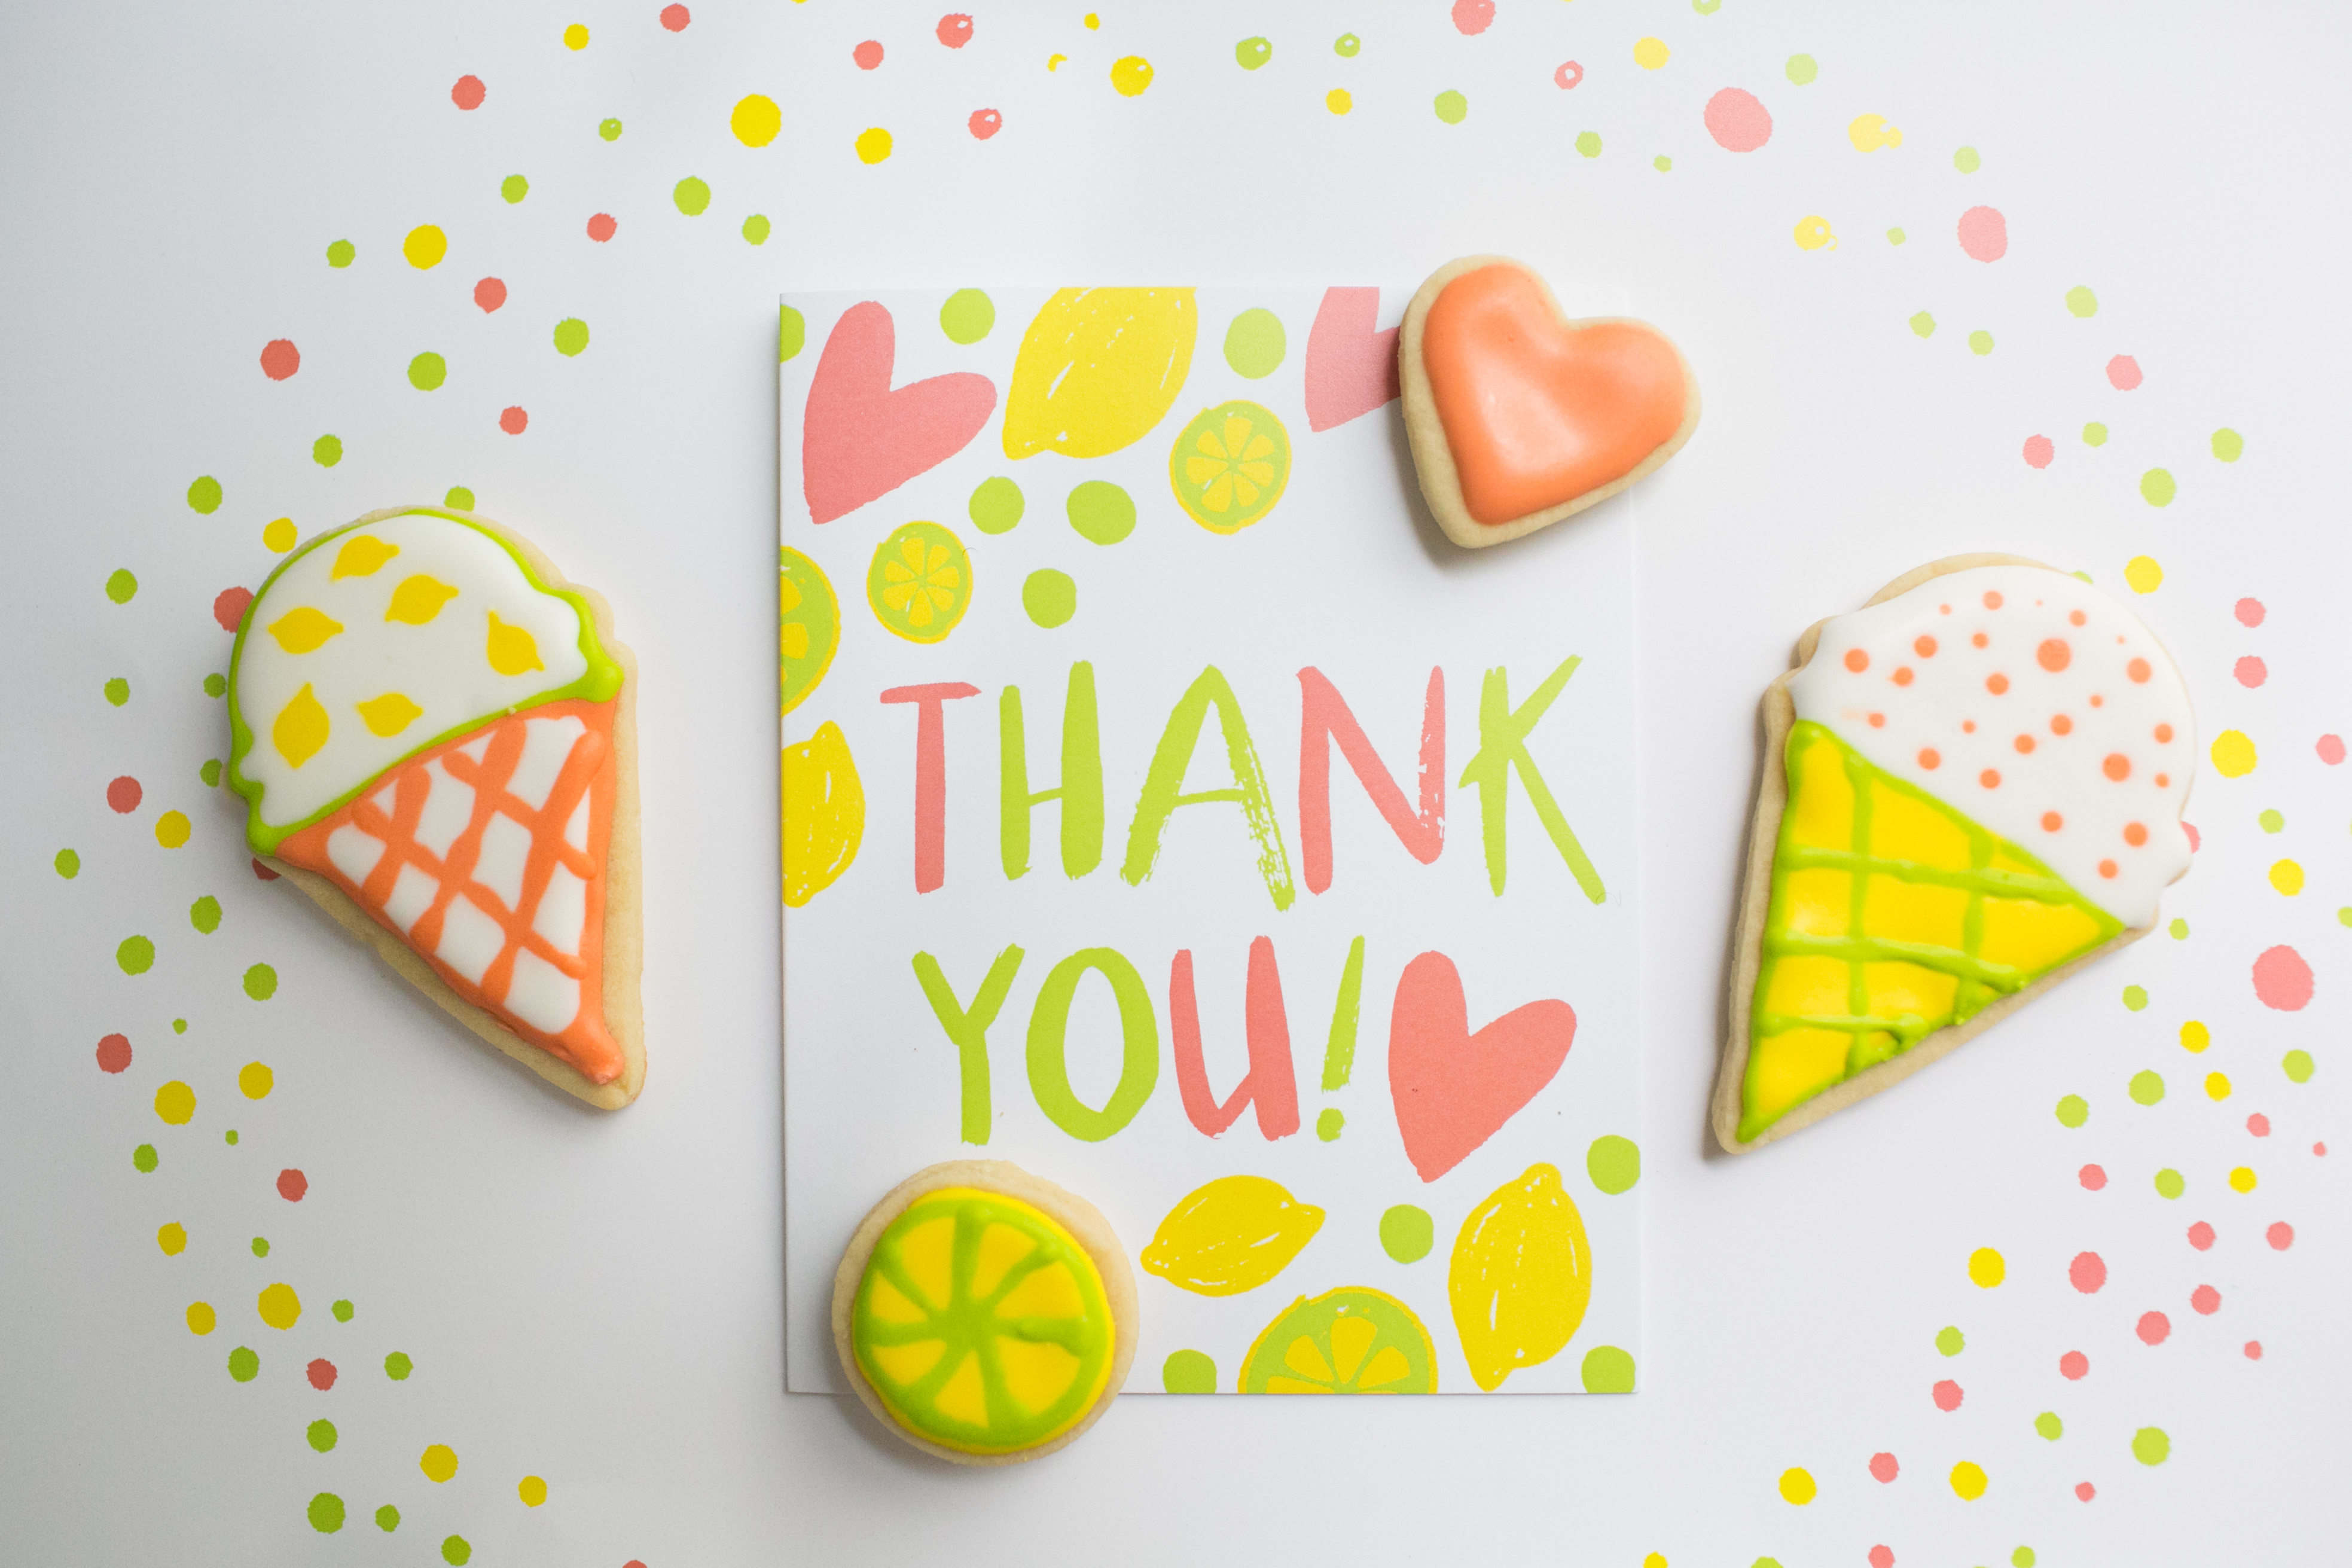 05-bellwether-events-you-look-lovely-photography-9th-letter-press-citrus-inspired-pucker-up-theme-lemon-lime-grapefruit-orange-bridal-shower